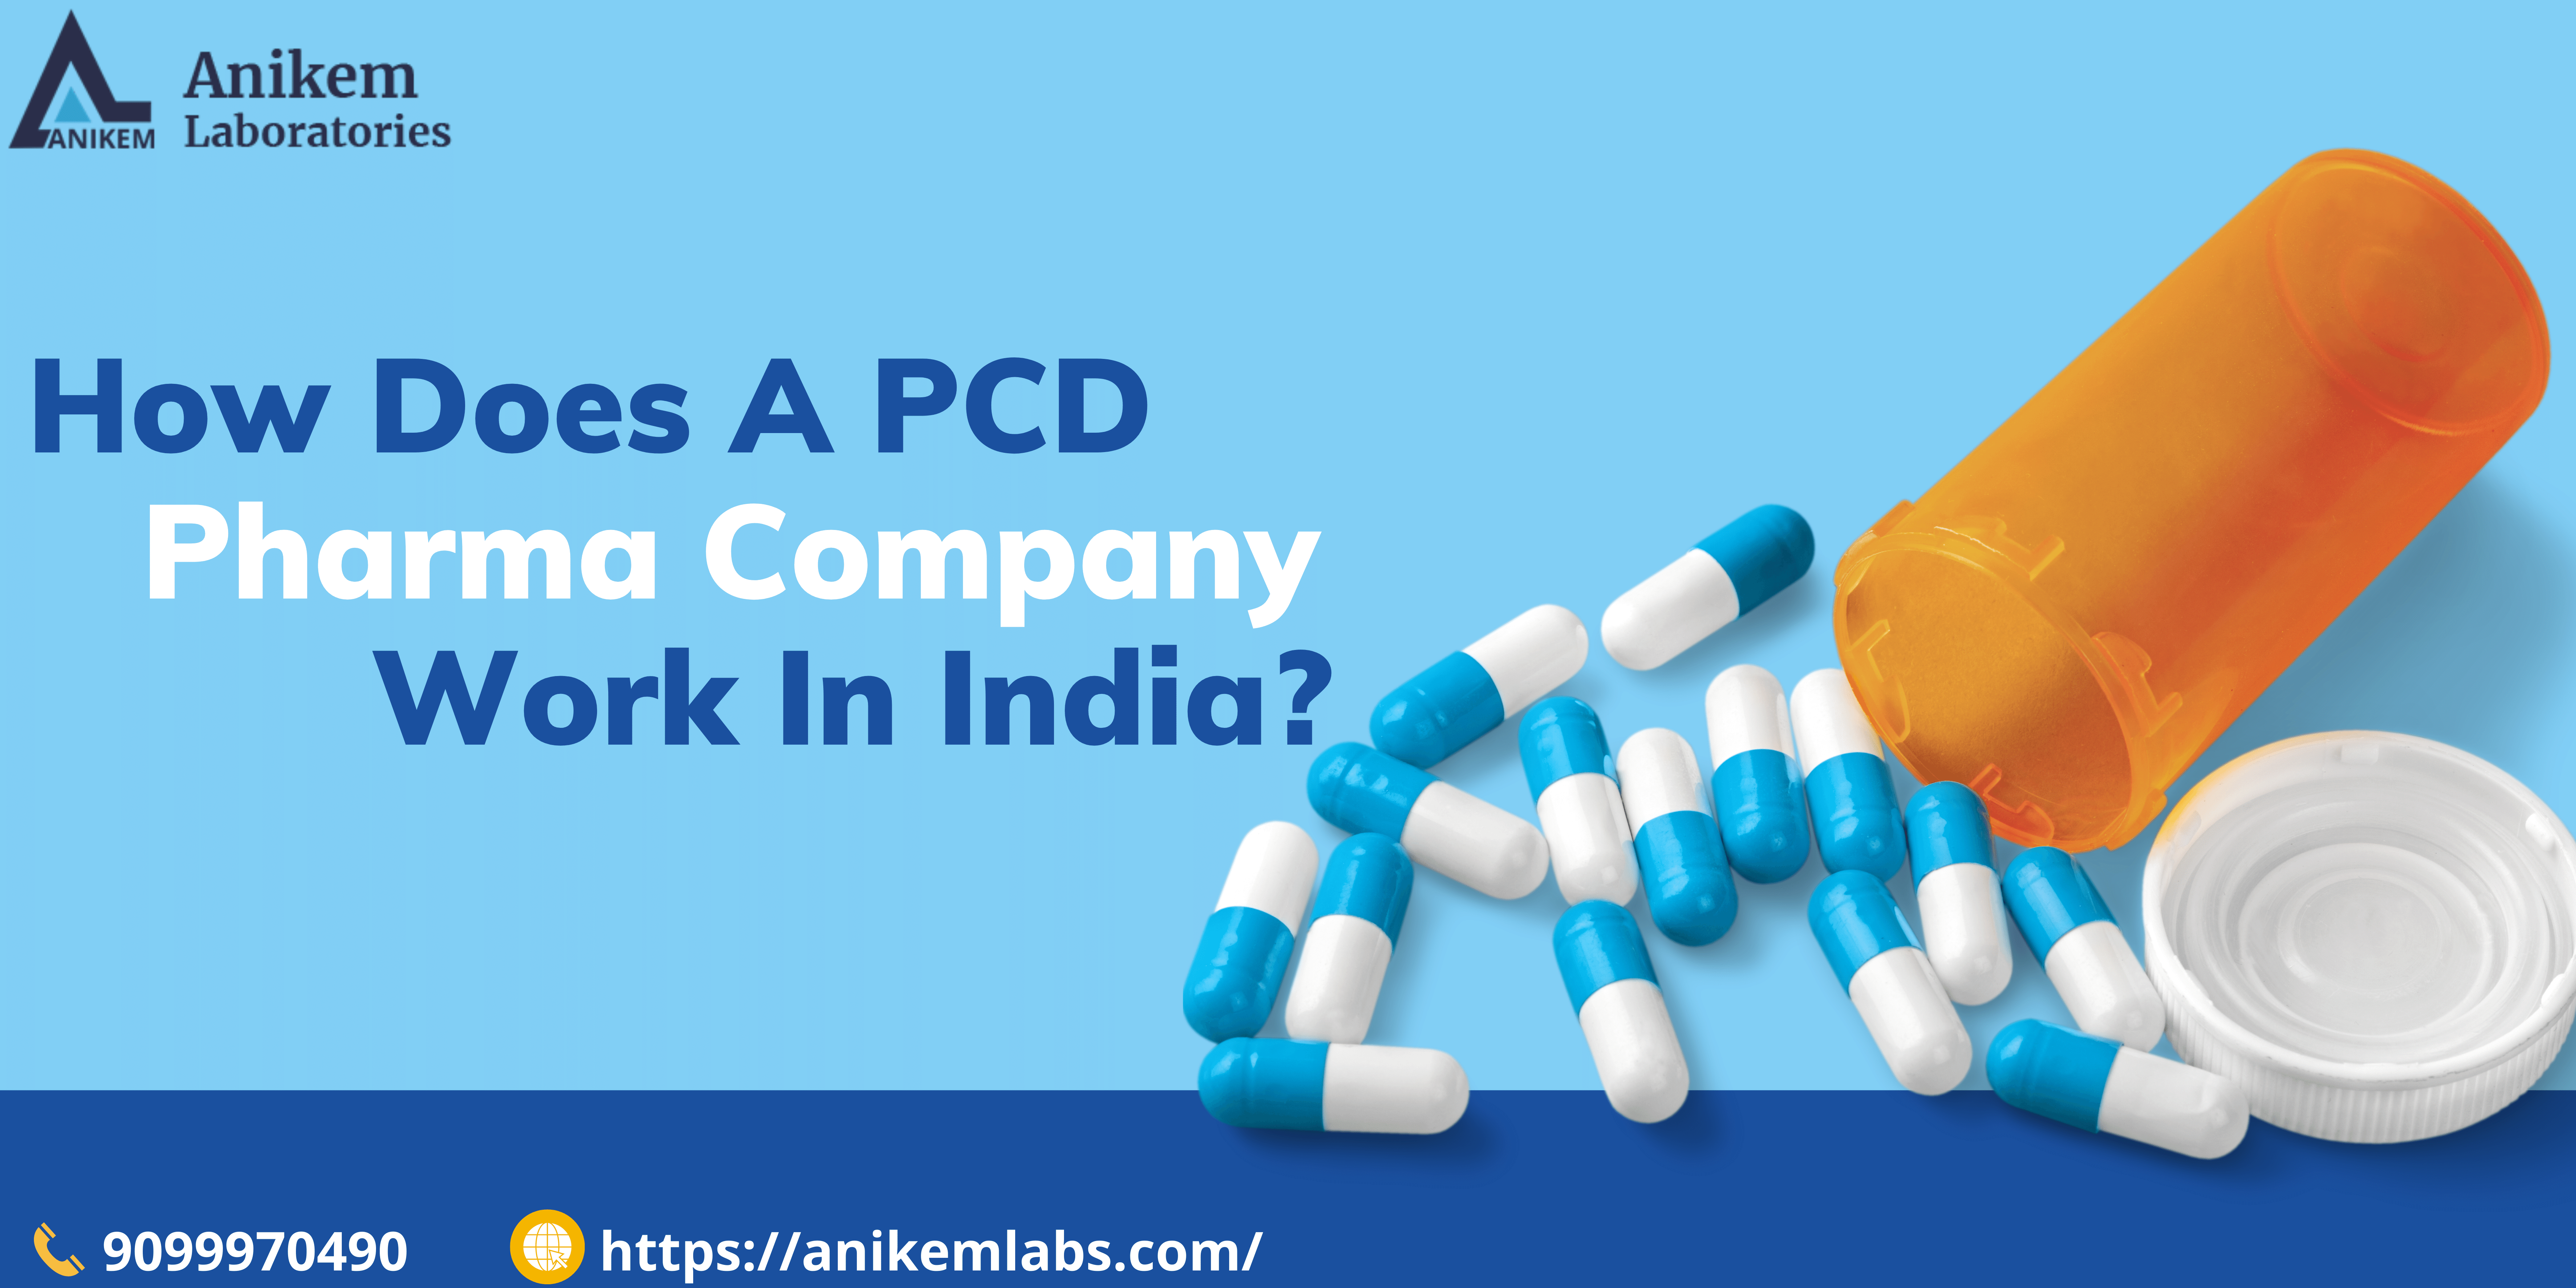 How Does A PCD Pharma Company Work In India?